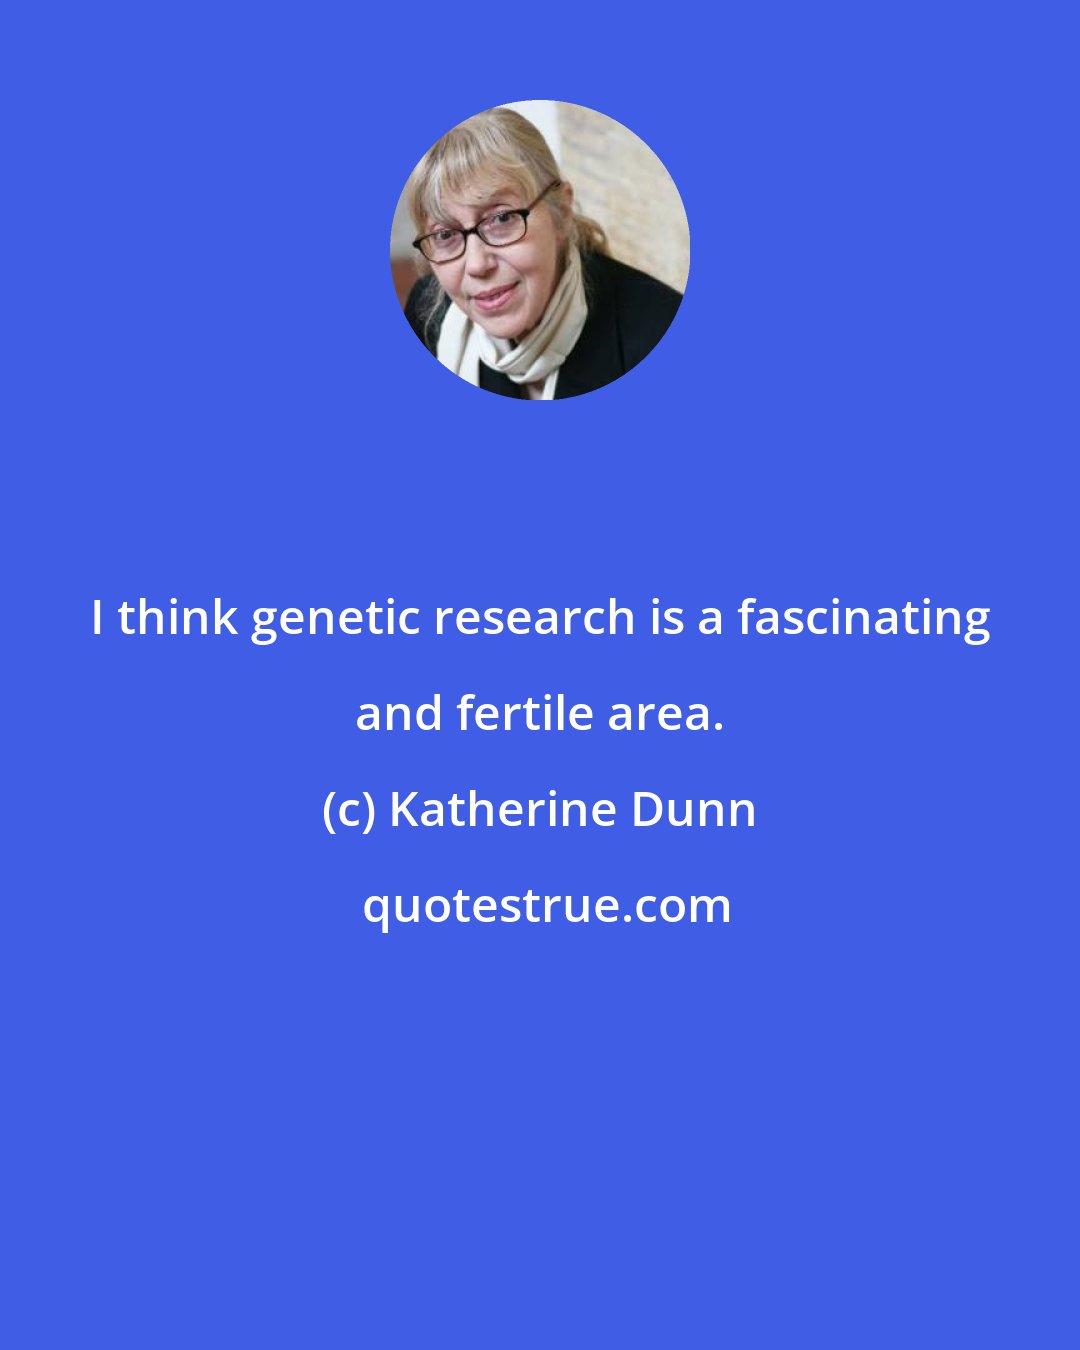 Katherine Dunn: I think genetic research is a fascinating and fertile area.